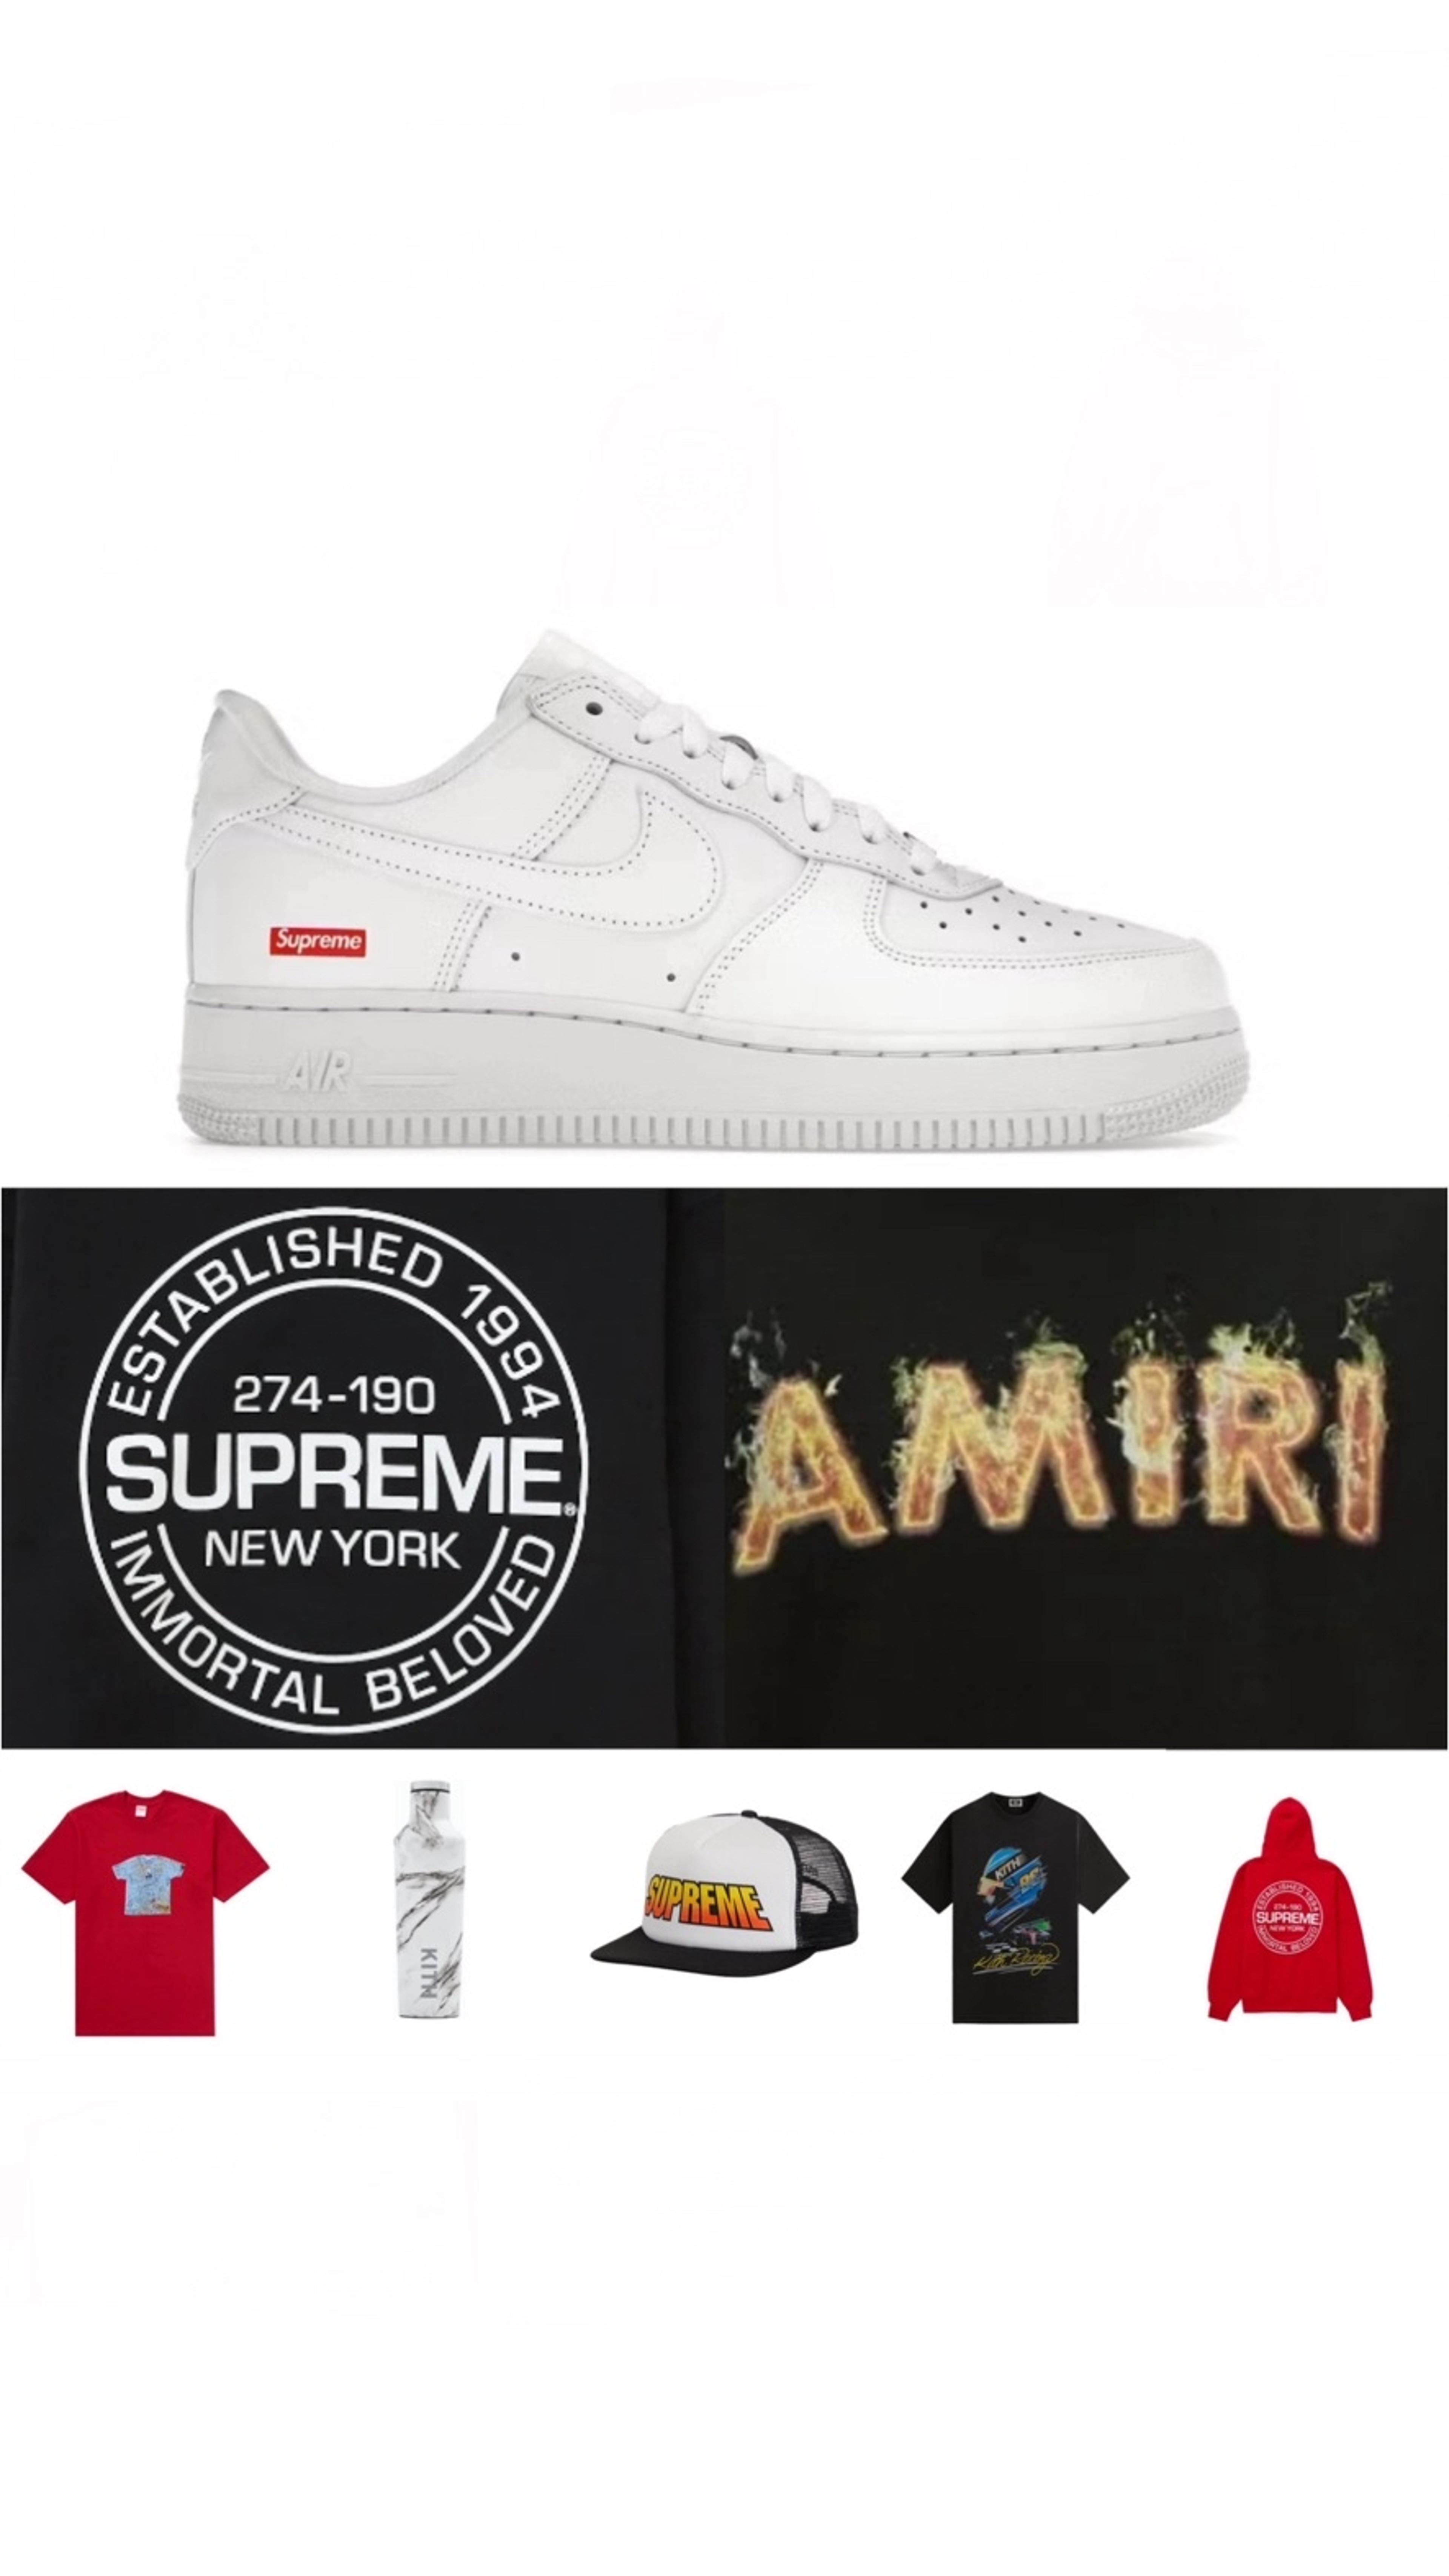 Preview image for the show titled "20/30 AMIRI,SUPREME, KITH AND MORE‼️" at Tomorrow @ 1:00 AM